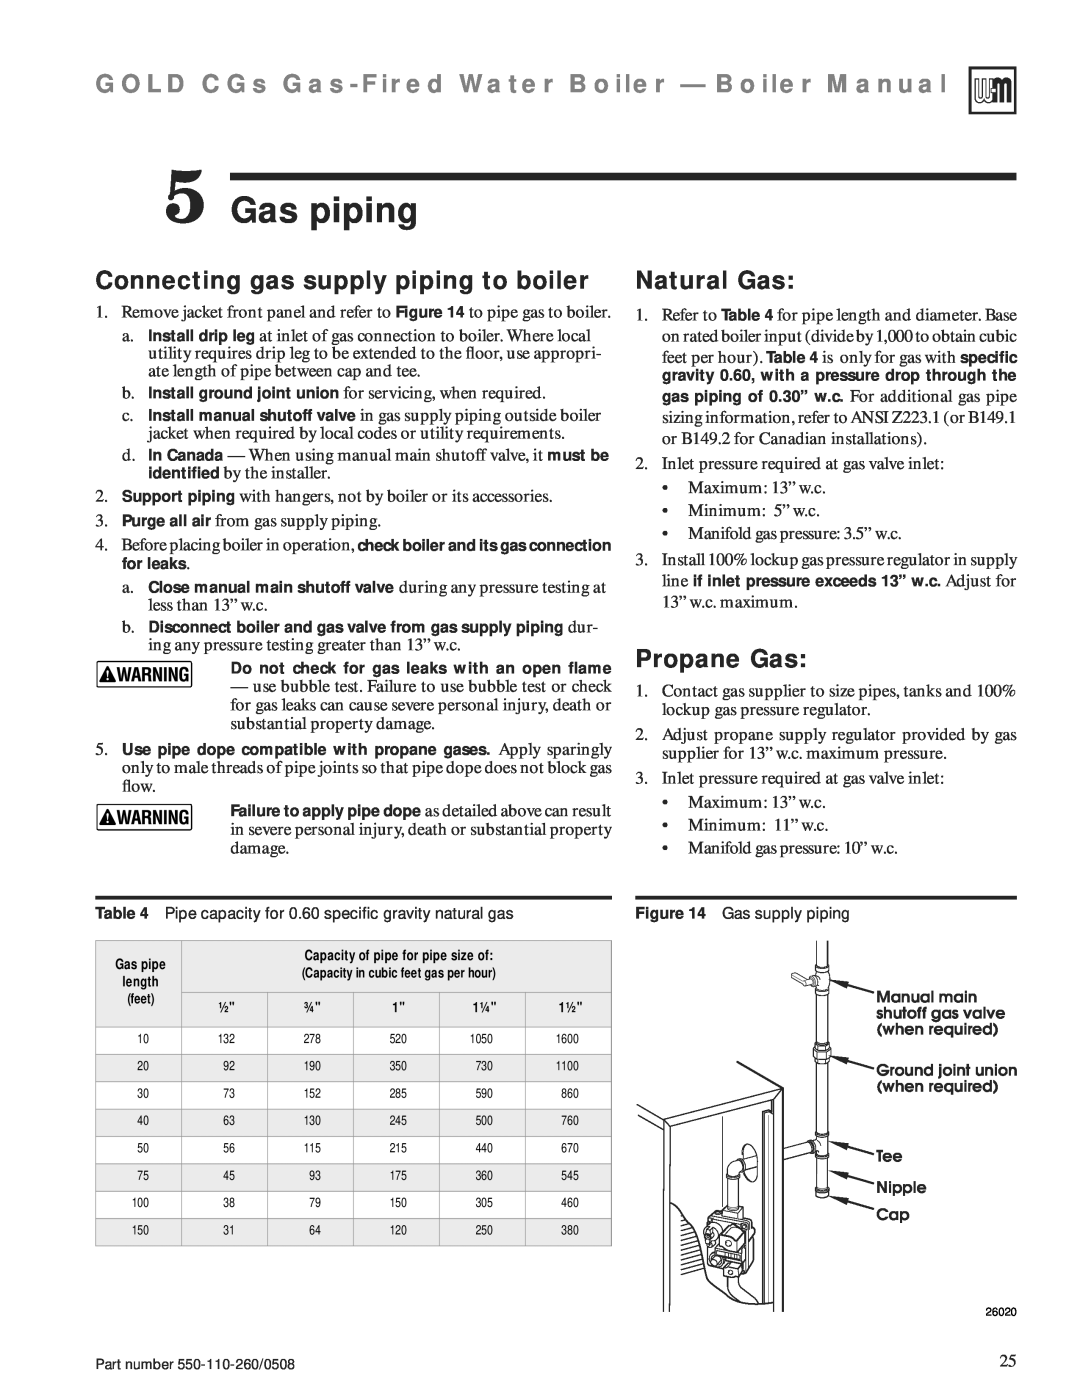 Weil-McLain 550-110-260/0508 manual Gas piping, Connecting gas supply piping to boiler, Natural Gas, Propane Gas 